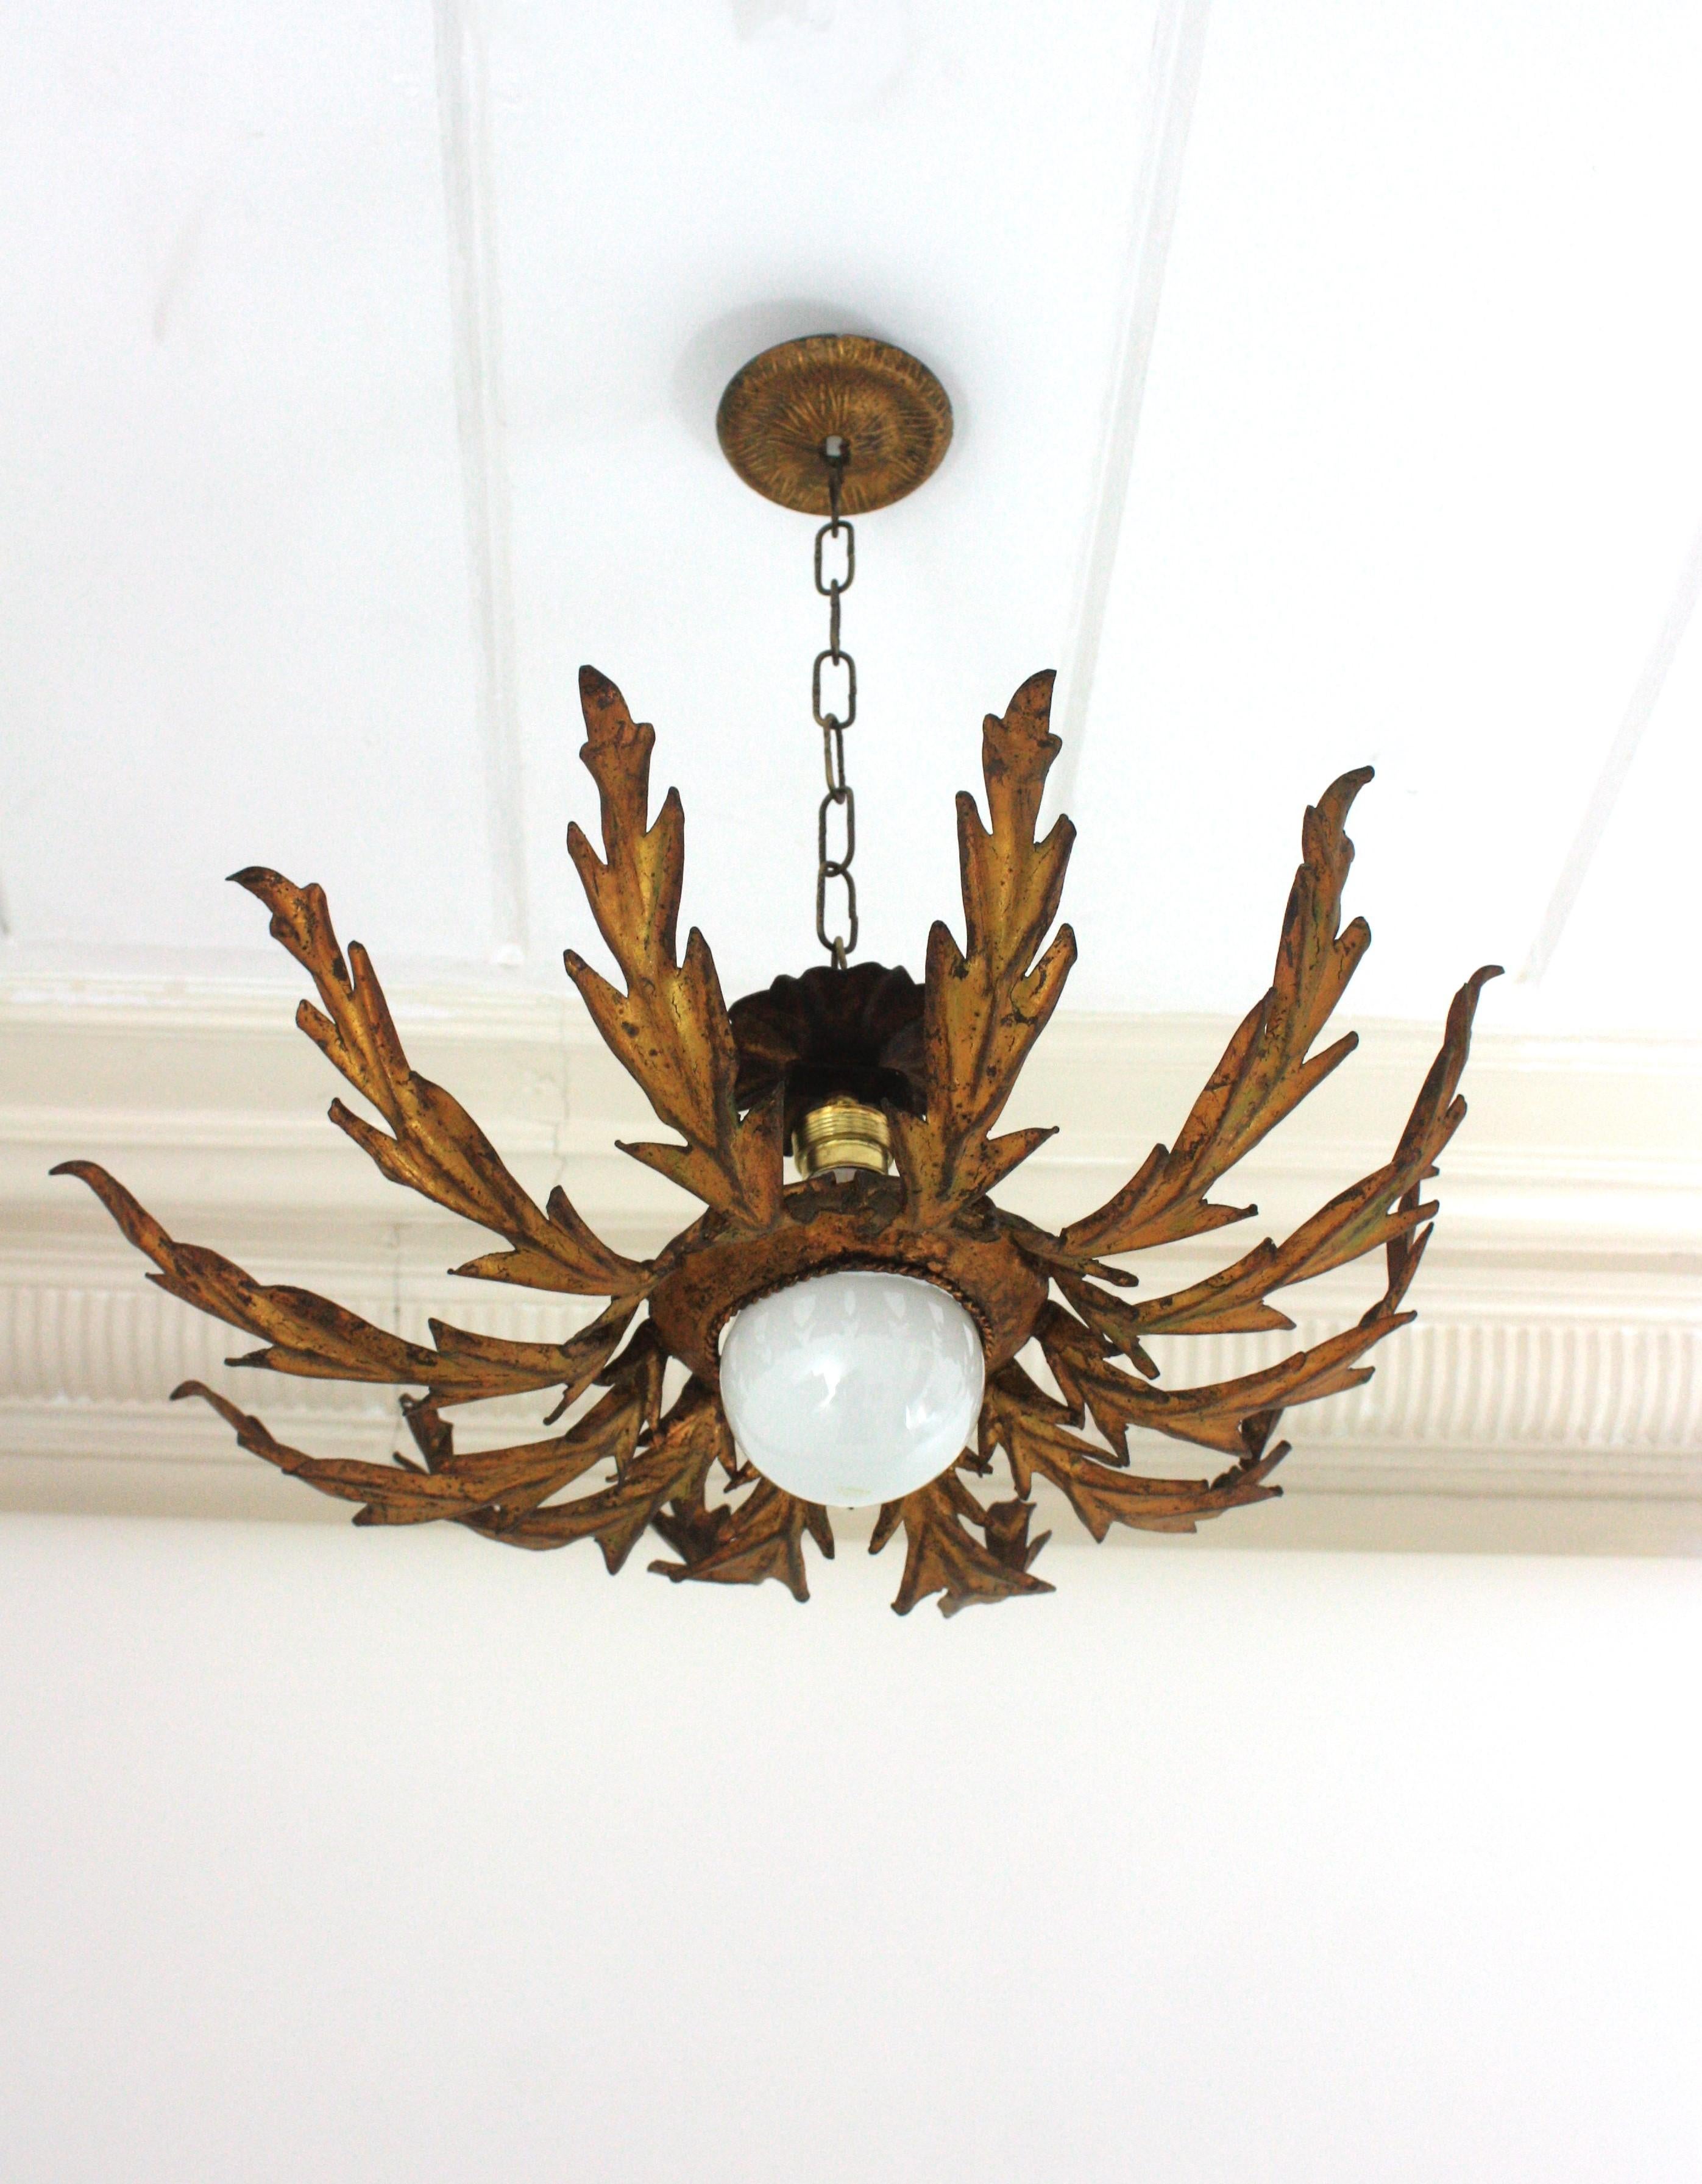 Hollywood Regency French Sunburst Leafed Ceiling Light Fixture in Gilt Iron, 1940s For Sale